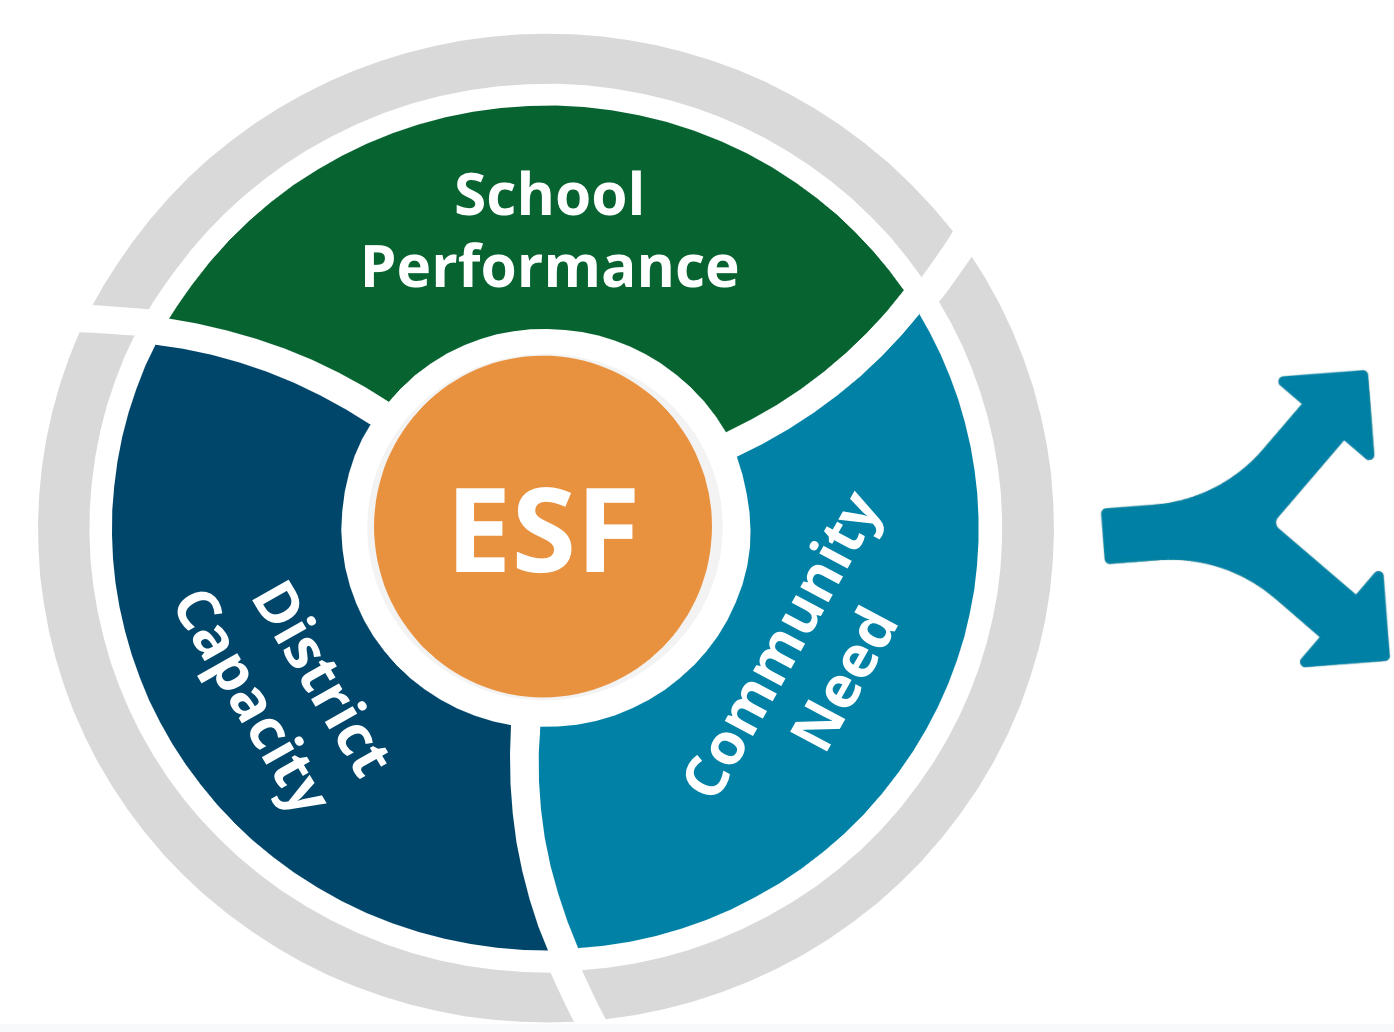 School Performance, Community Need and District Capacity with ESF central to analysis